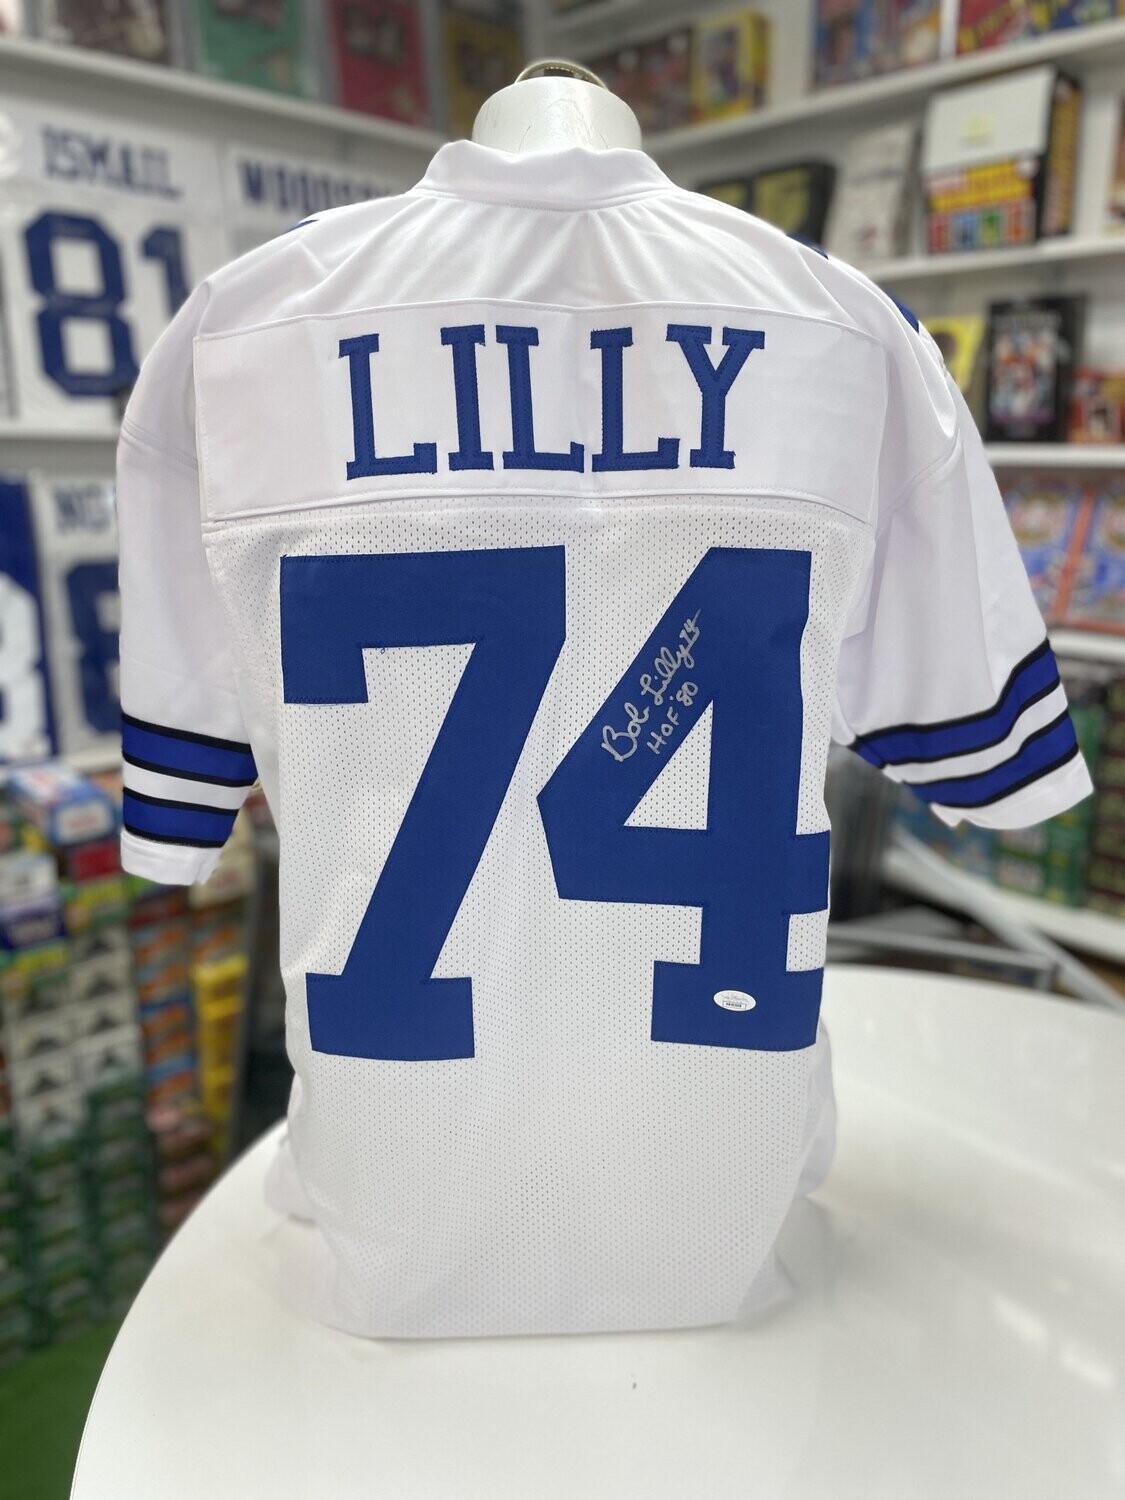 BOB LILLY DALLAS COWBOYS SIGNED SEWN PRO STYLE FOOTBALL WHITE JERSEY - SIZE  Adult 2XL